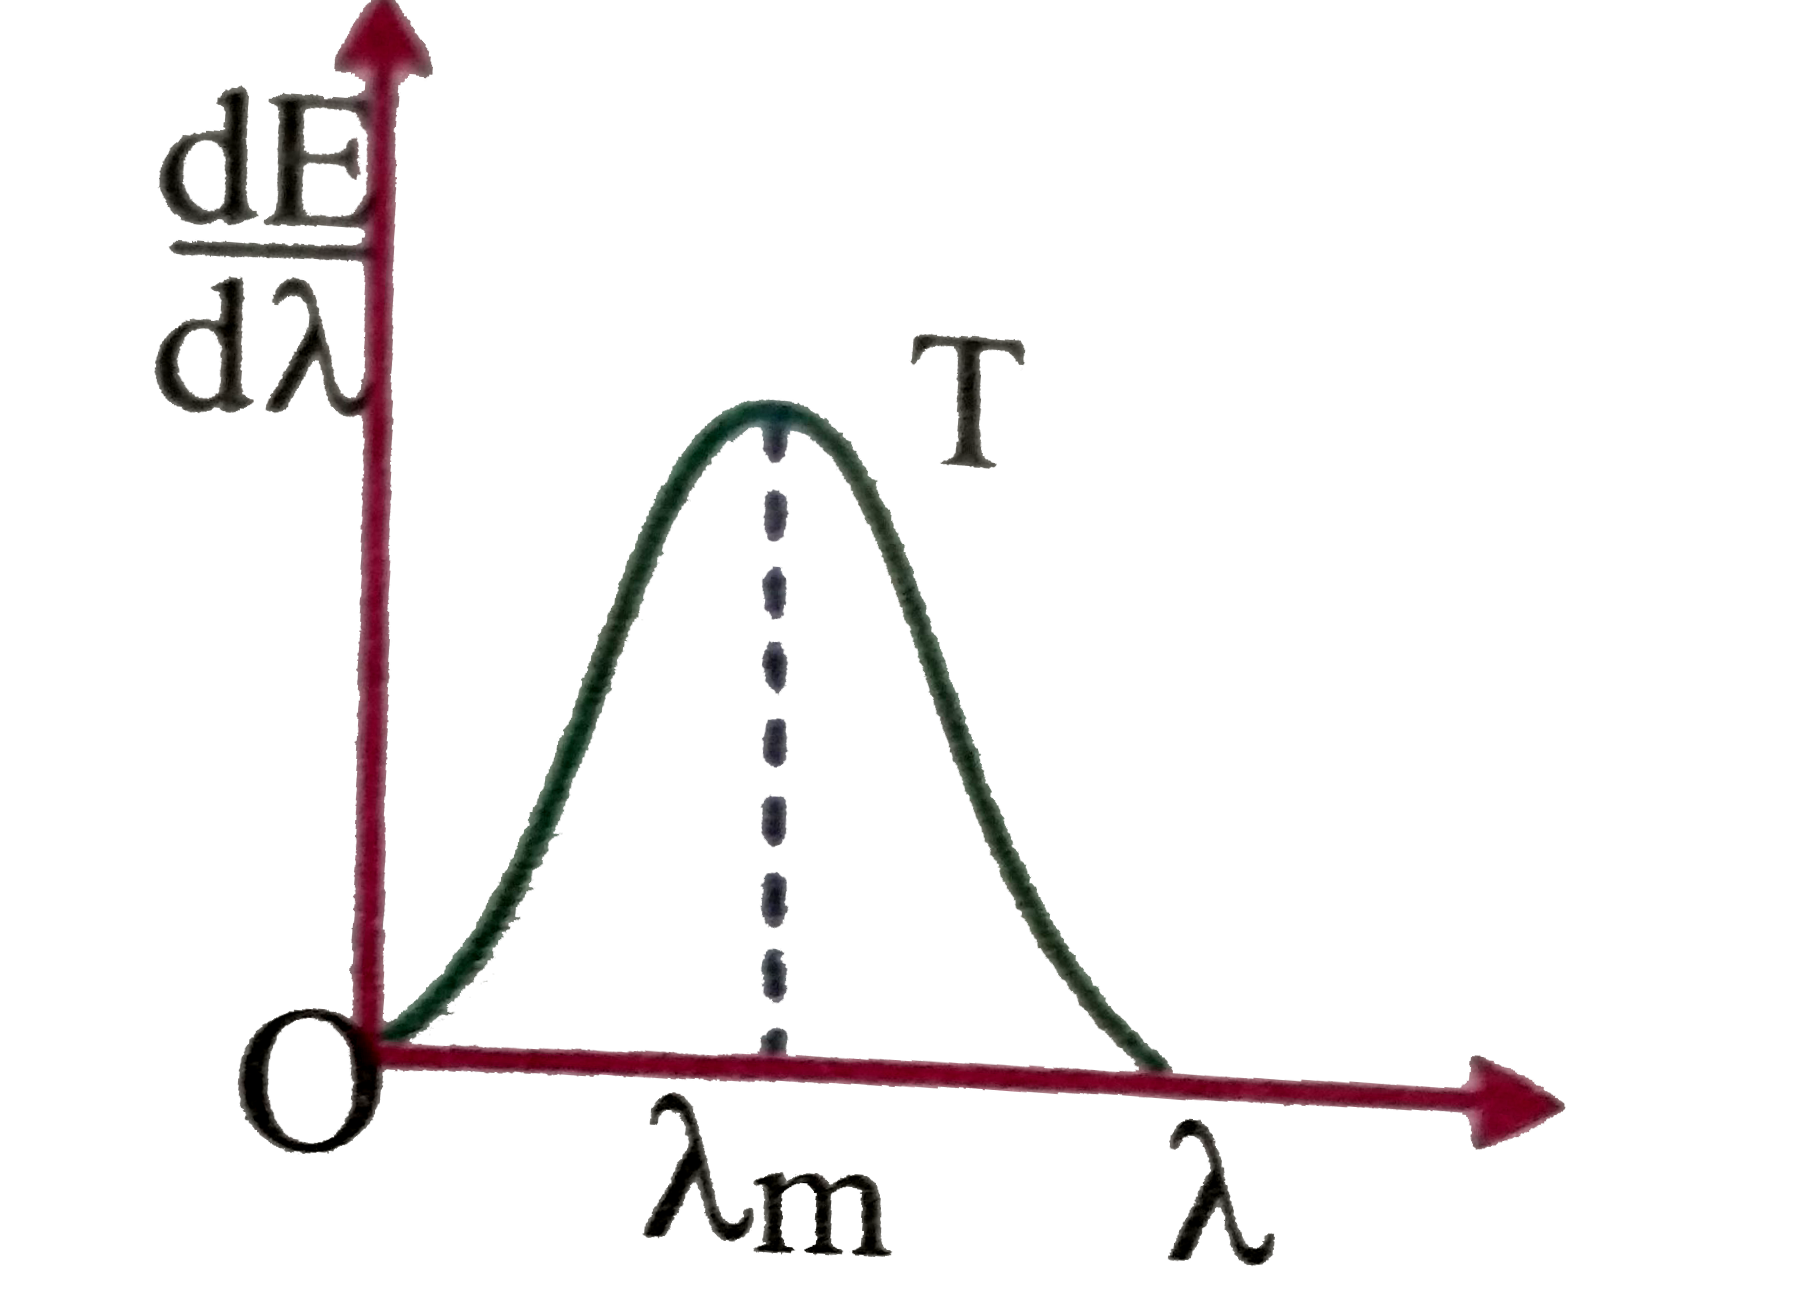 The shows a radiant energy spectrum graph for a black body at at temperature T      If the temperature of the body is raised to a higher temperature T then choose the correct statement (s).